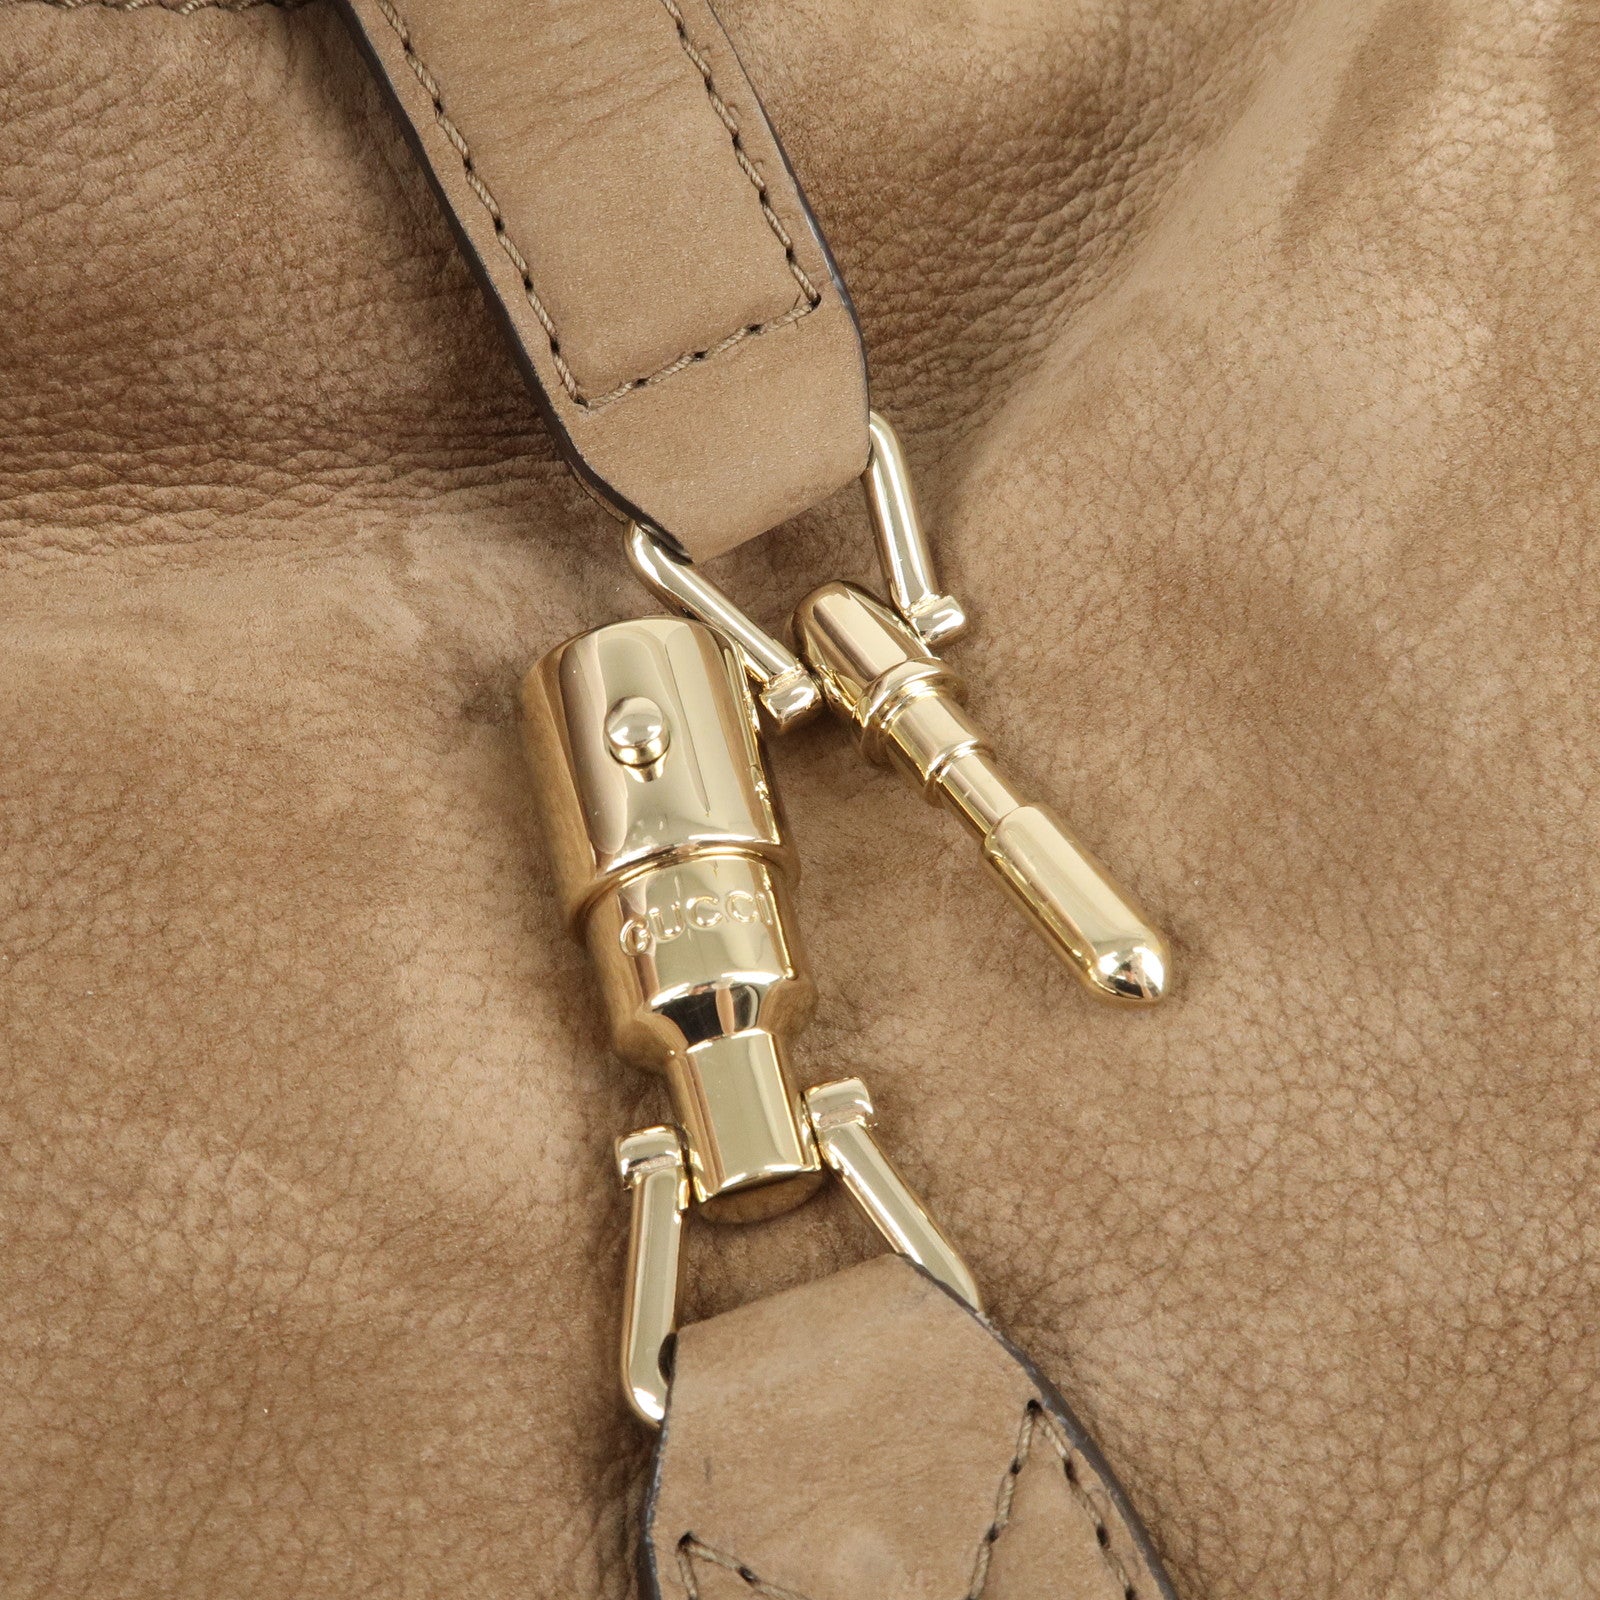 GUCCI-New-Jackie-Nubuck-Leather-Shoulder-Bag-Brown-277520 – dct-ep_vintage  luxury Store